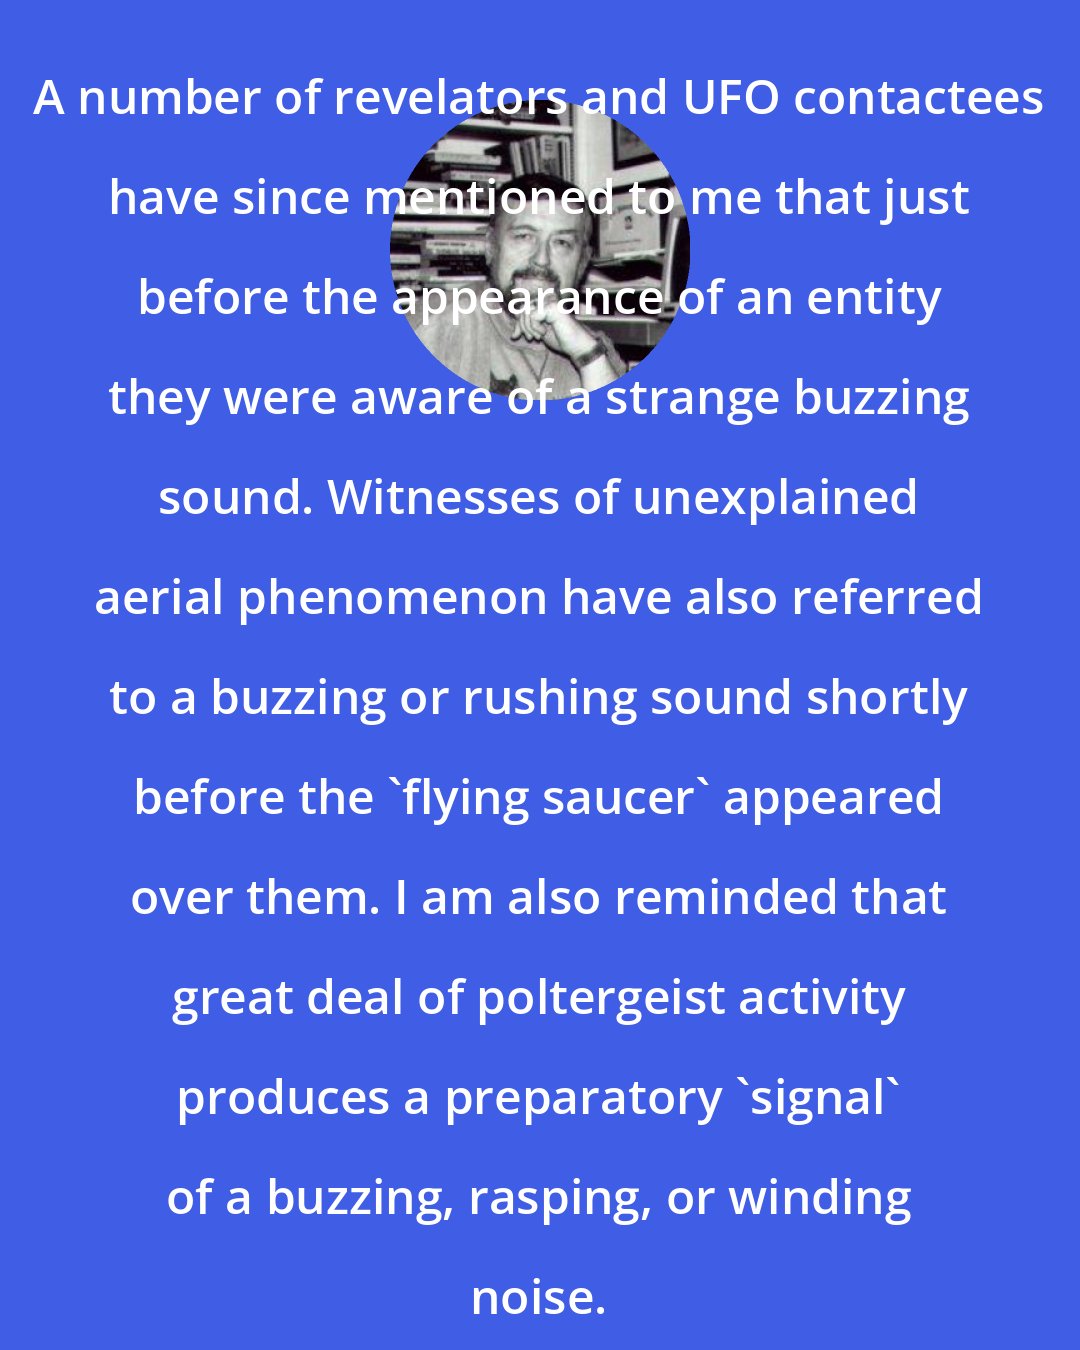 Brad Steiger: A number of revelators and UFO contactees have since mentioned to me that just before the appearance of an entity they were aware of a strange buzzing sound. Witnesses of unexplained aerial phenomenon have also referred to a buzzing or rushing sound shortly before the 'flying saucer' appeared over them. I am also reminded that great deal of poltergeist activity produces a preparatory 'signal' of a buzzing, rasping, or winding noise.